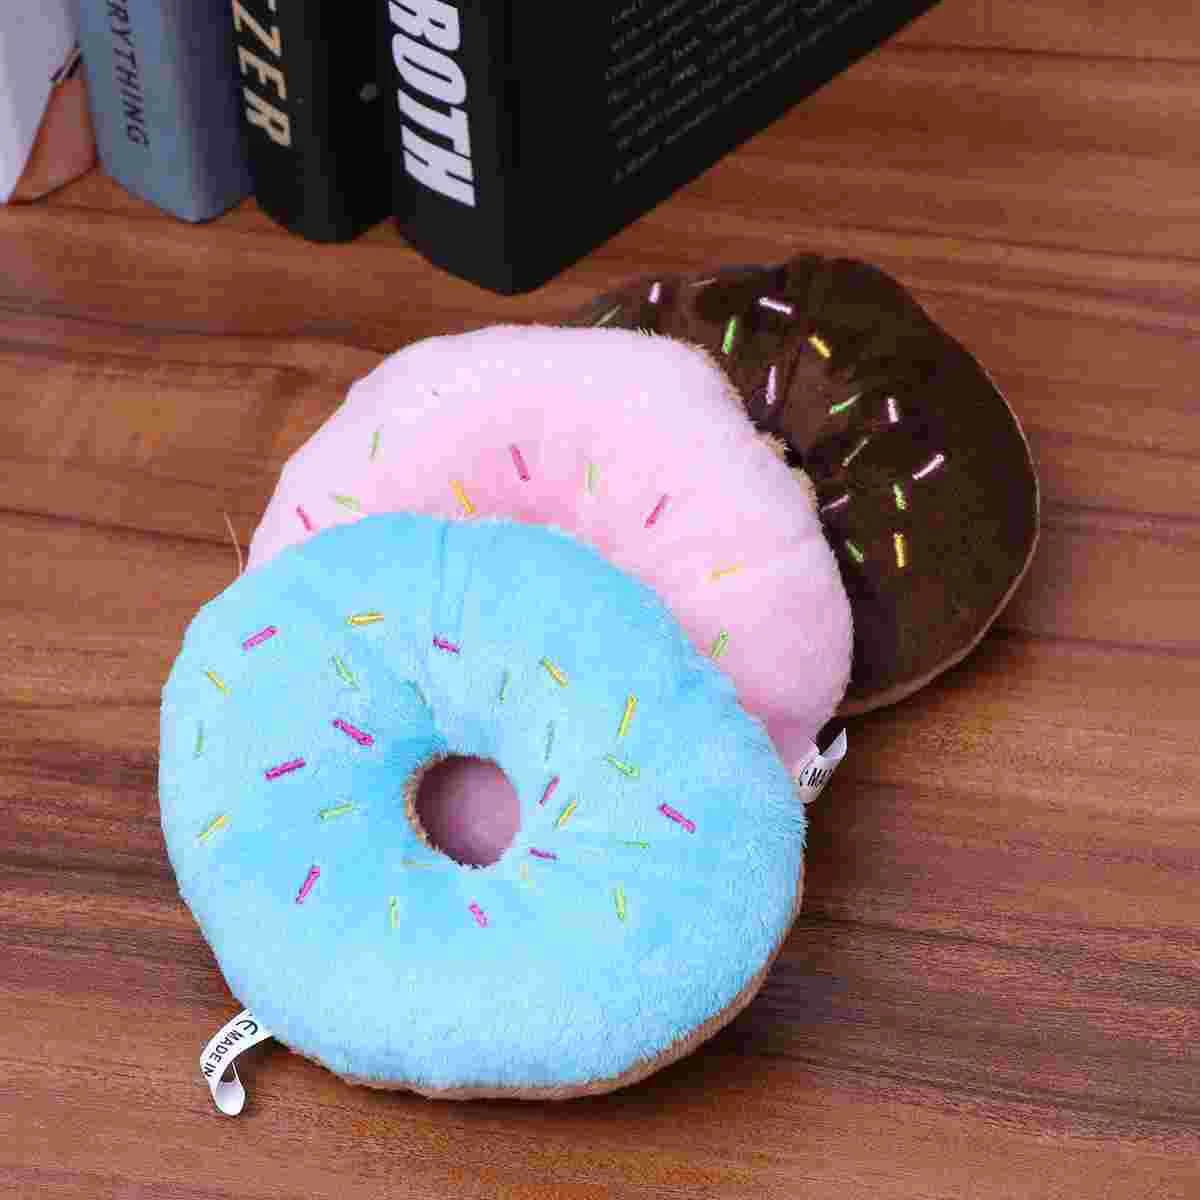 

6pcs Dog Chew Toy Plush Donut Shaped Squeaky Squeaking Sound Toy Plush Pet Puppy Toys Pets Bite Chewing Puppy Dog Toy (Coffee +